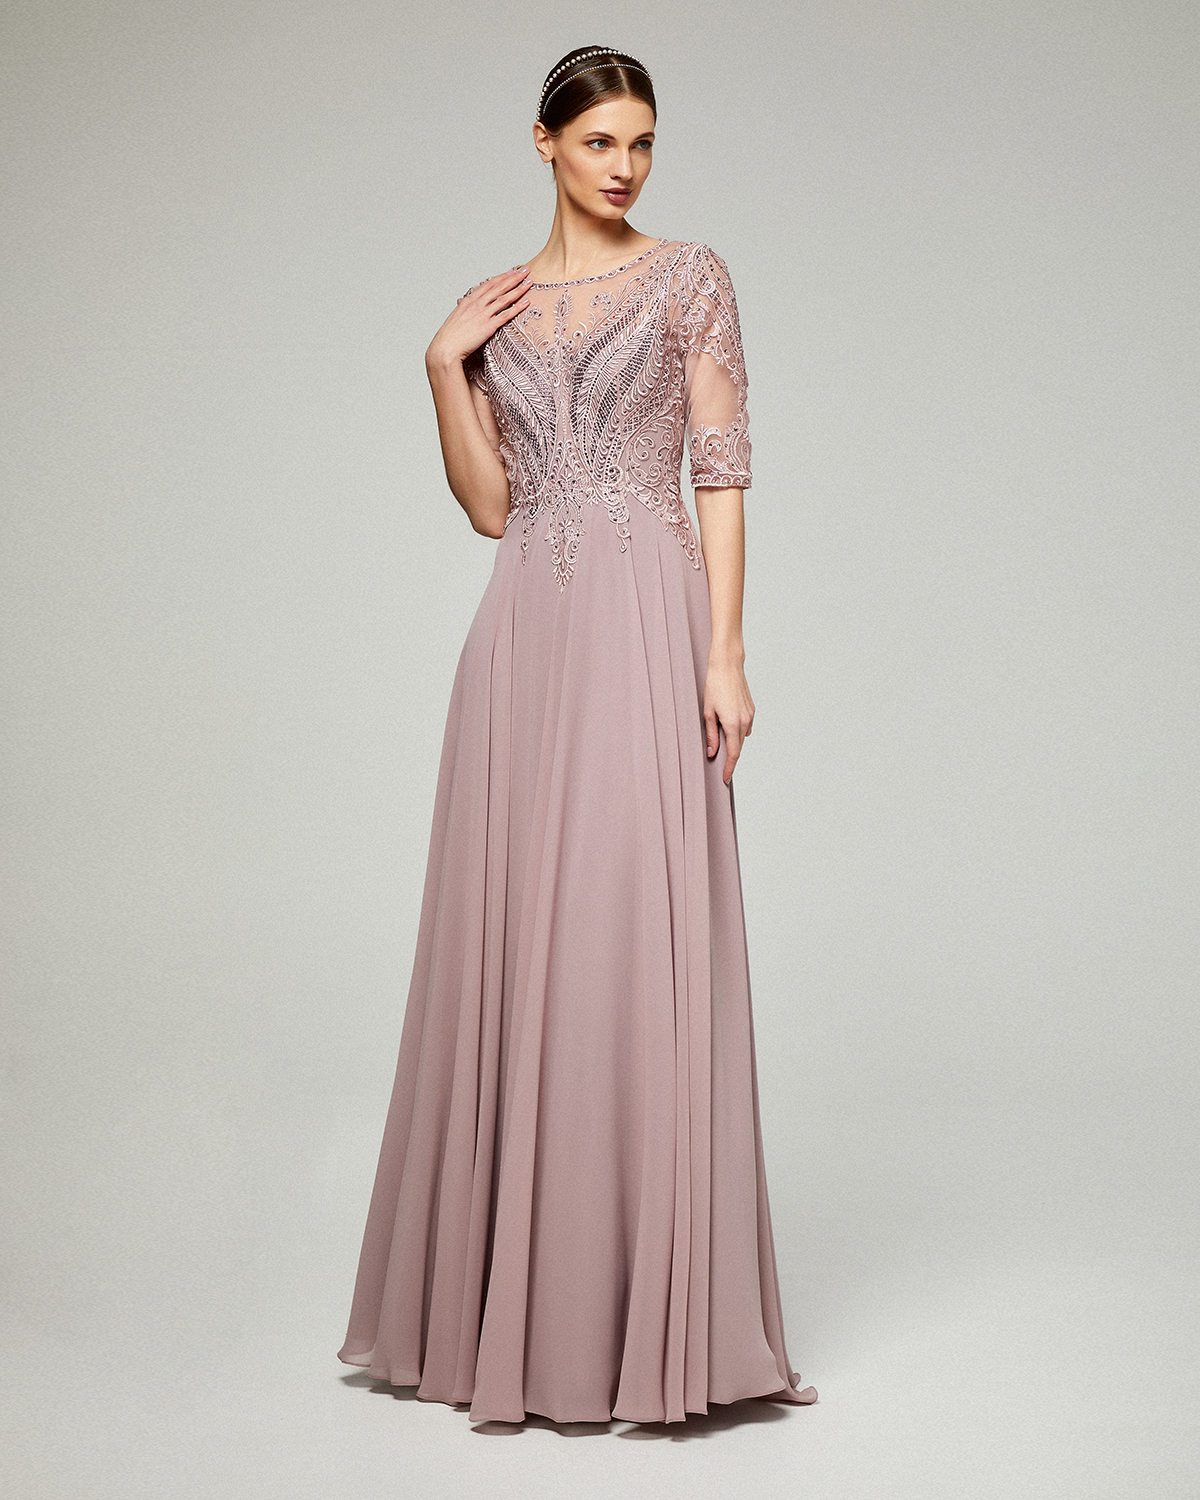 Classic Dresses / Long evening chiffon dress with lace top and sleeves for the mother of the bride